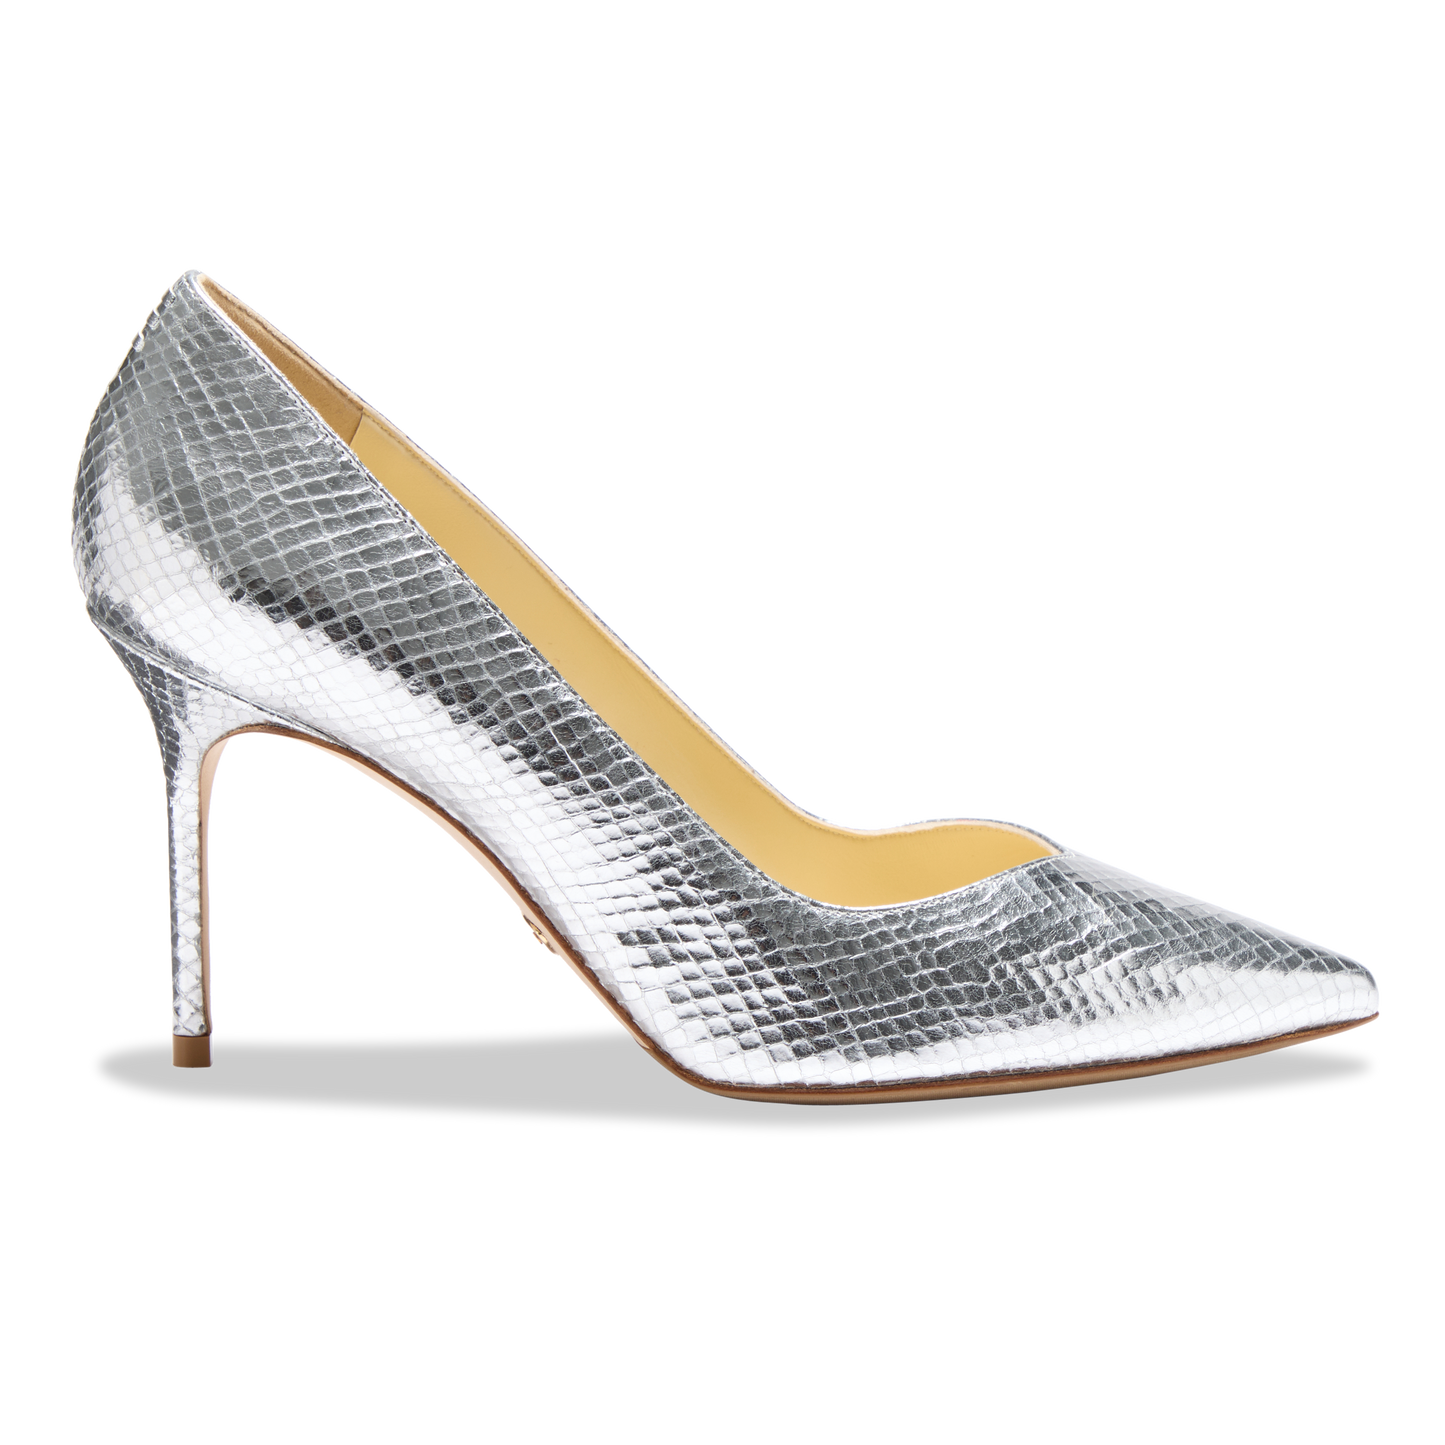 Perfect Pump 85 in Silver Embossed Snake